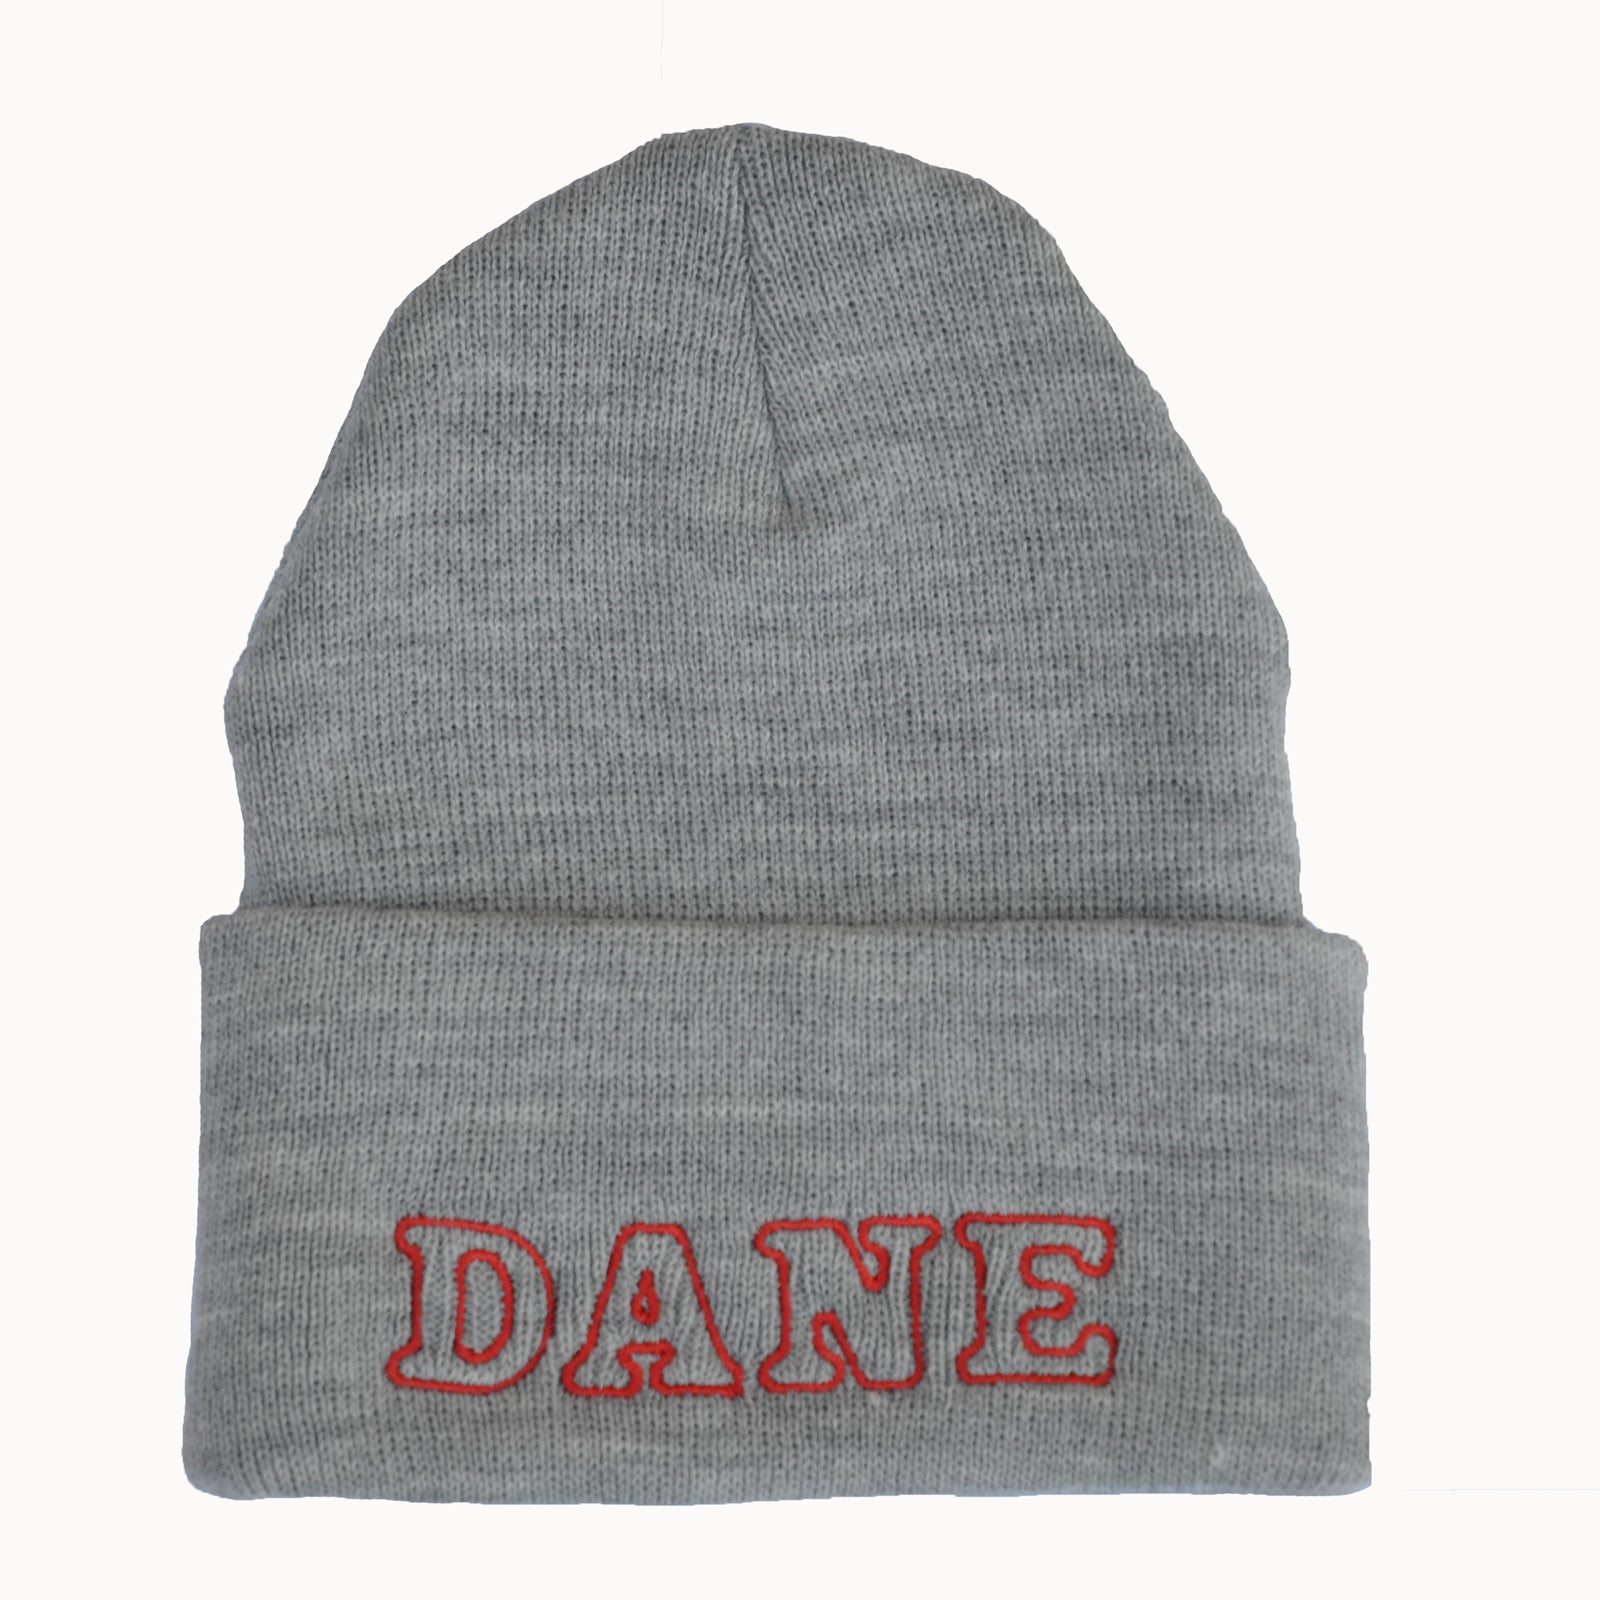 Adult Knit Beanie - DANE, gray & red